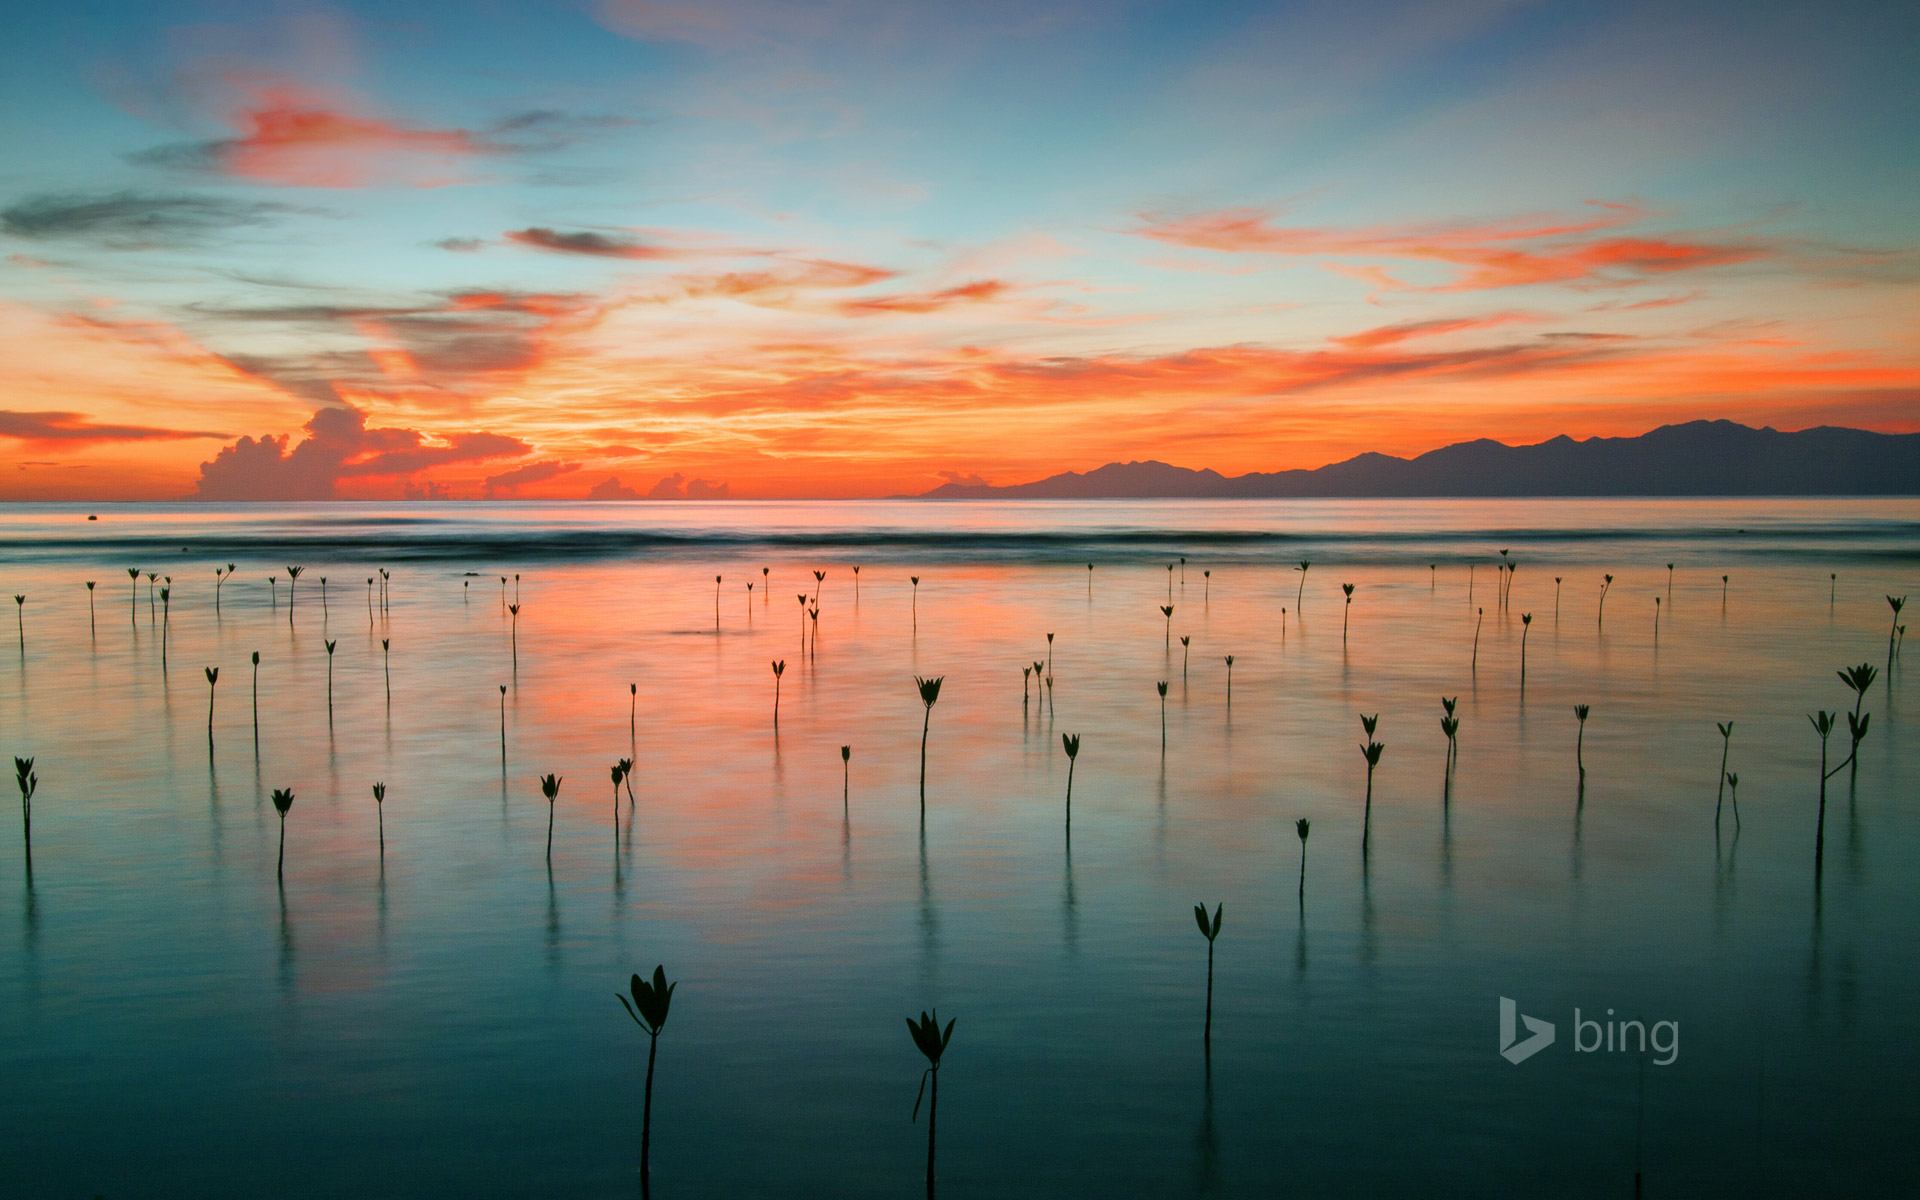 Bing's Homepage Gallery Offers The Most Beautiful Wallpaper